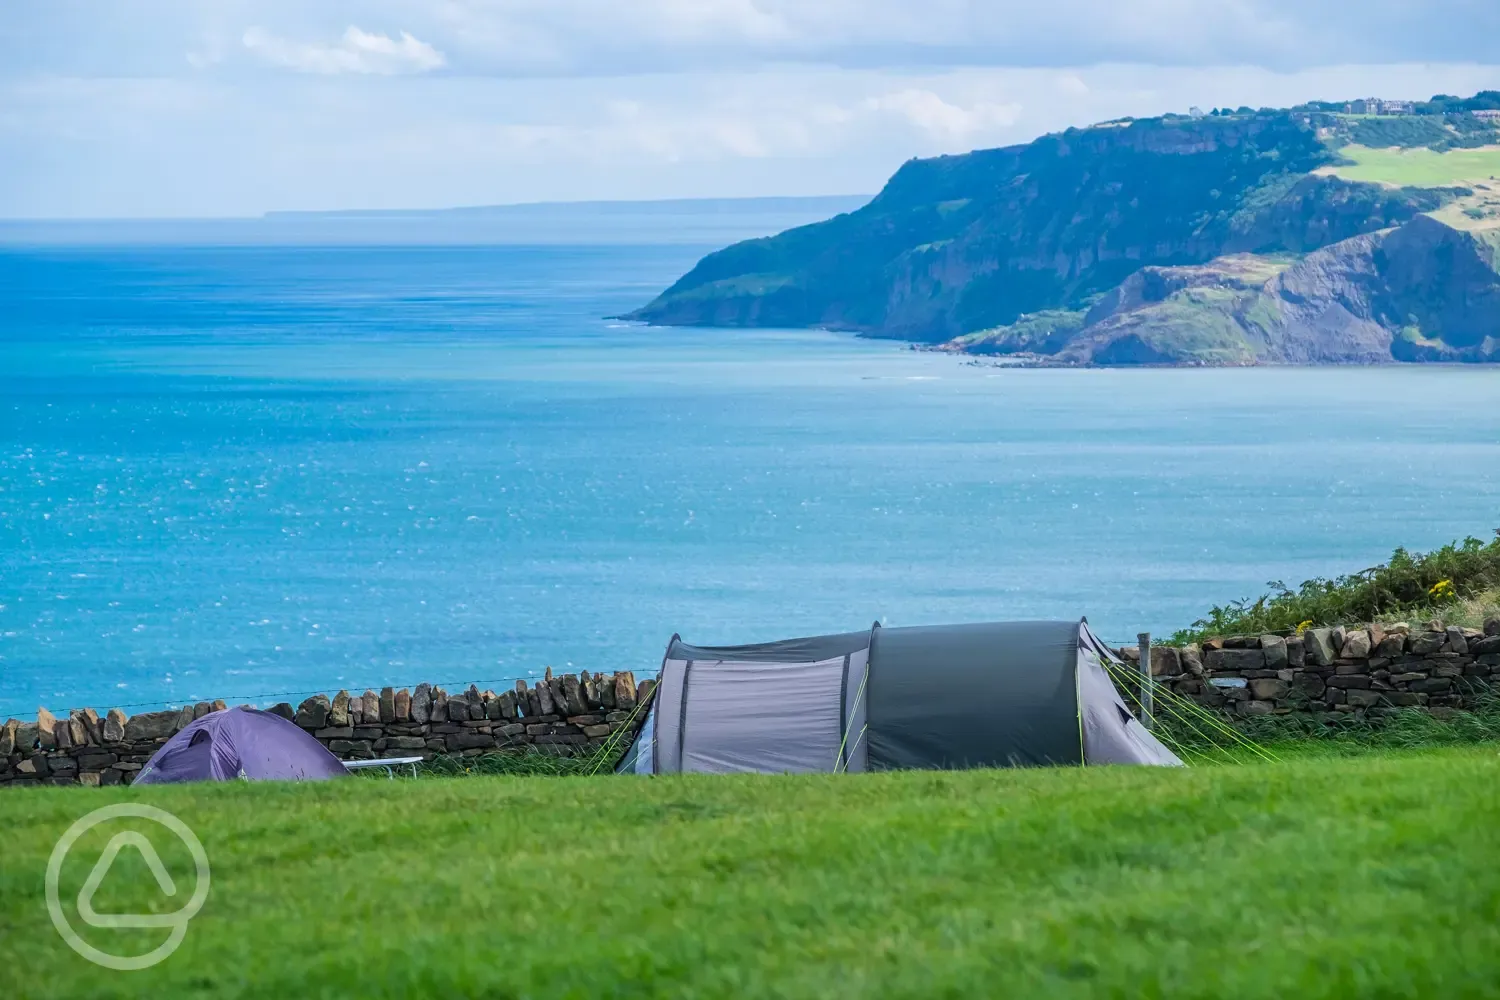 Non electric grass pitches with sea views